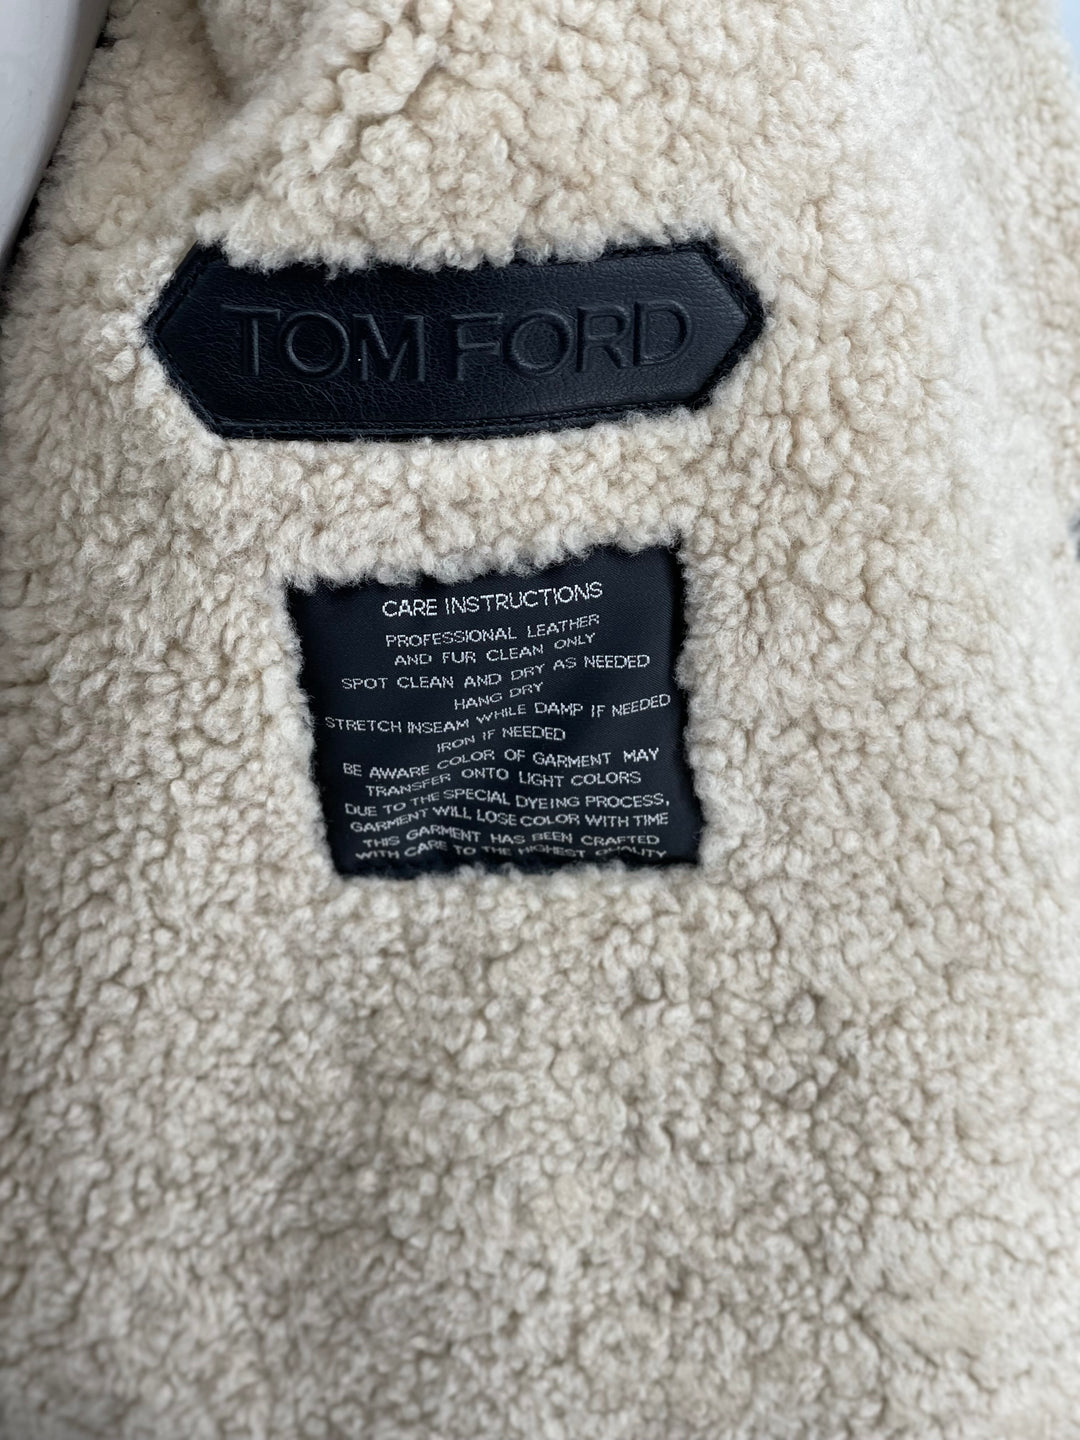 Tom Ford Denim Jacket with Shearling Lining